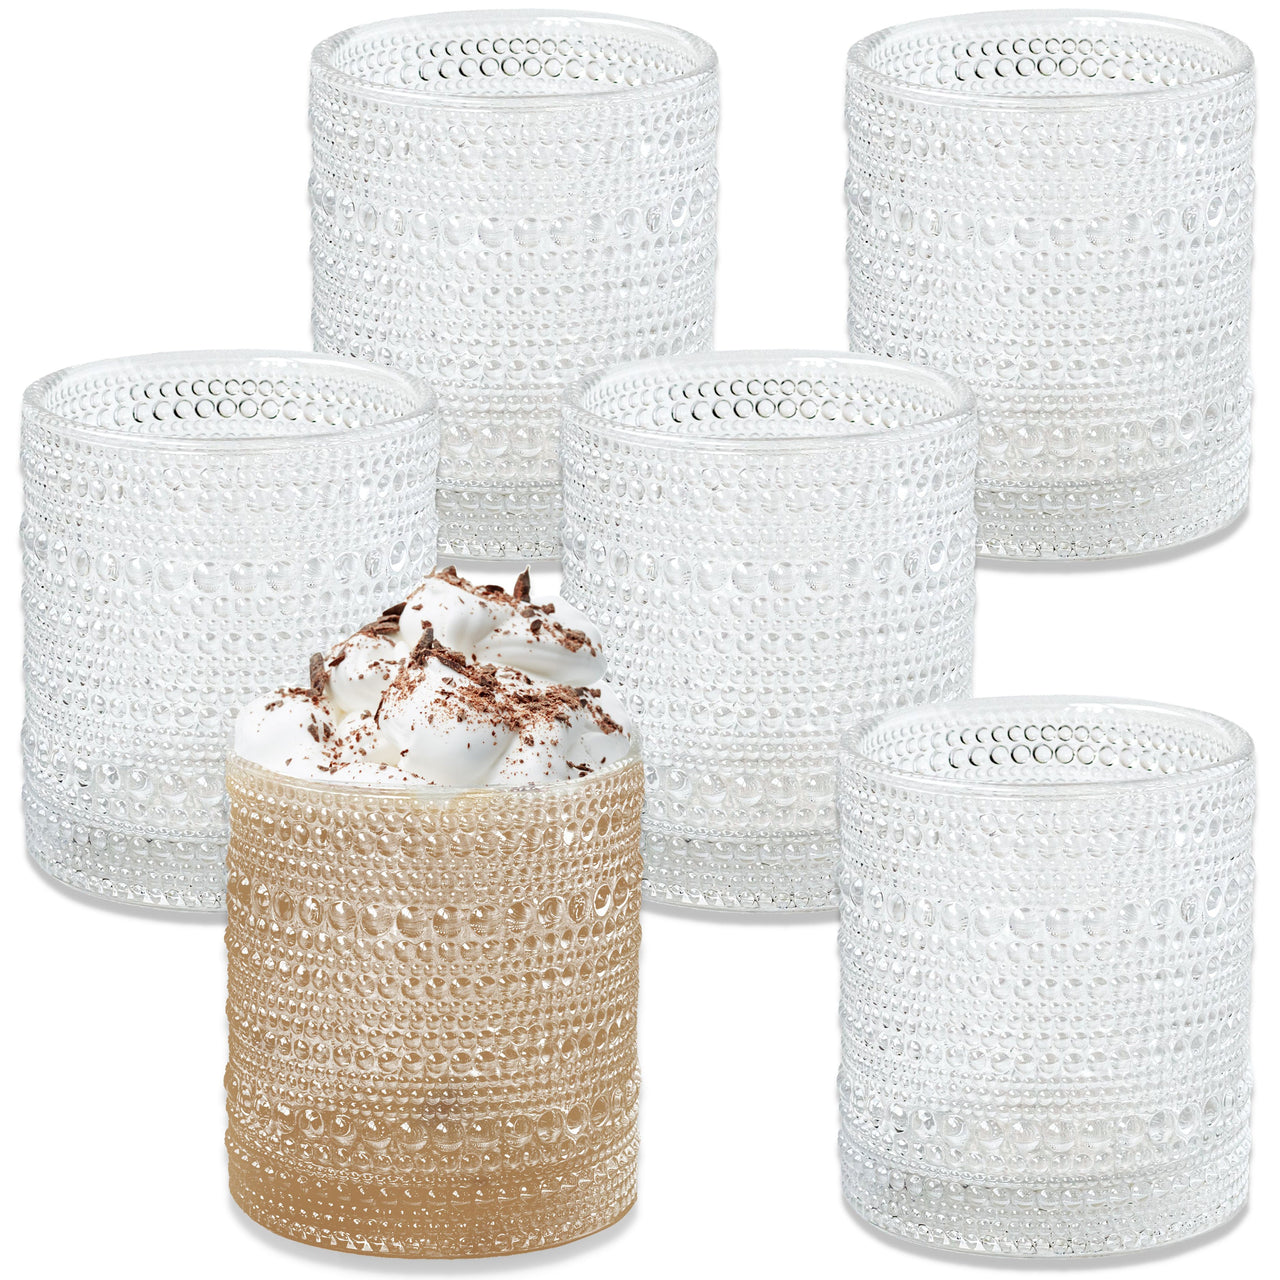 10 oz. Textured Hobnail Beaded Clear Rocks Drinking Glasses (Set of 6) - Alternate Image 8 | My Wedding Favors